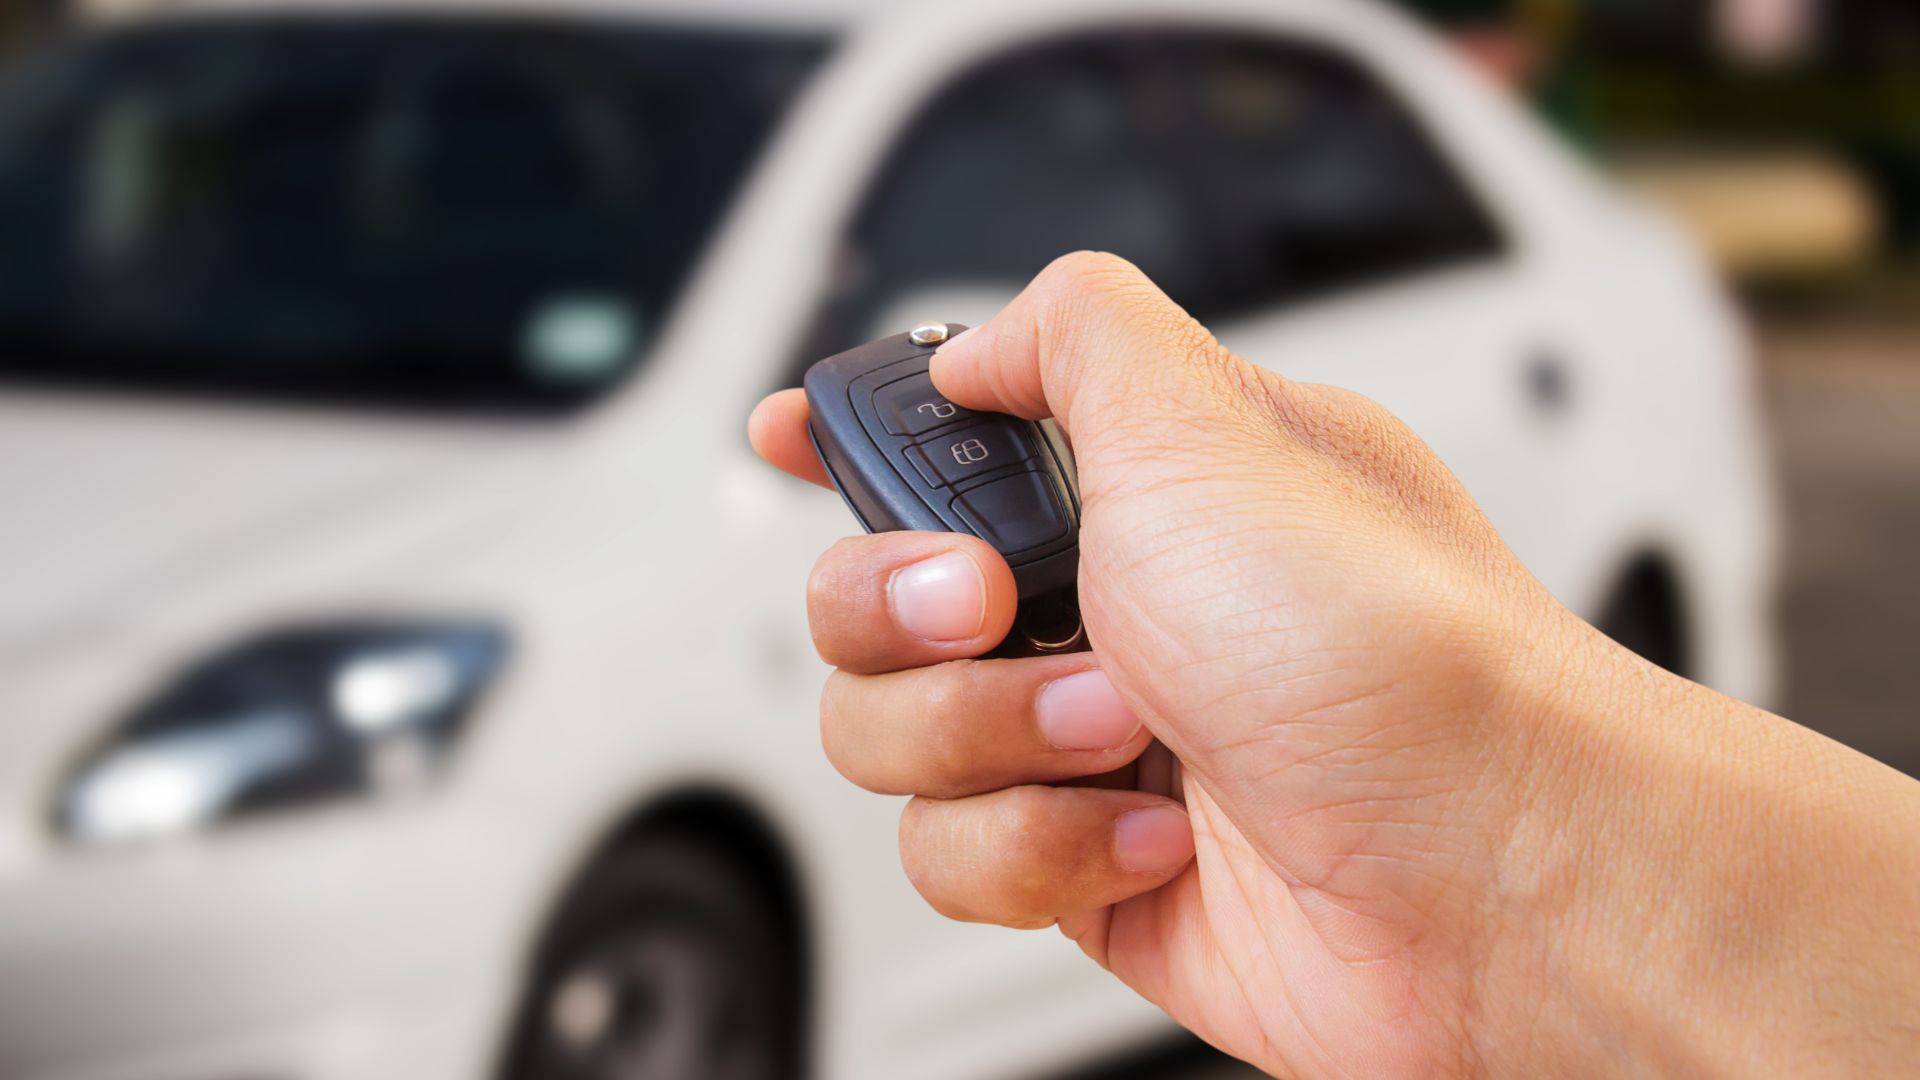 a hand holding a cell phone in front of a white car.